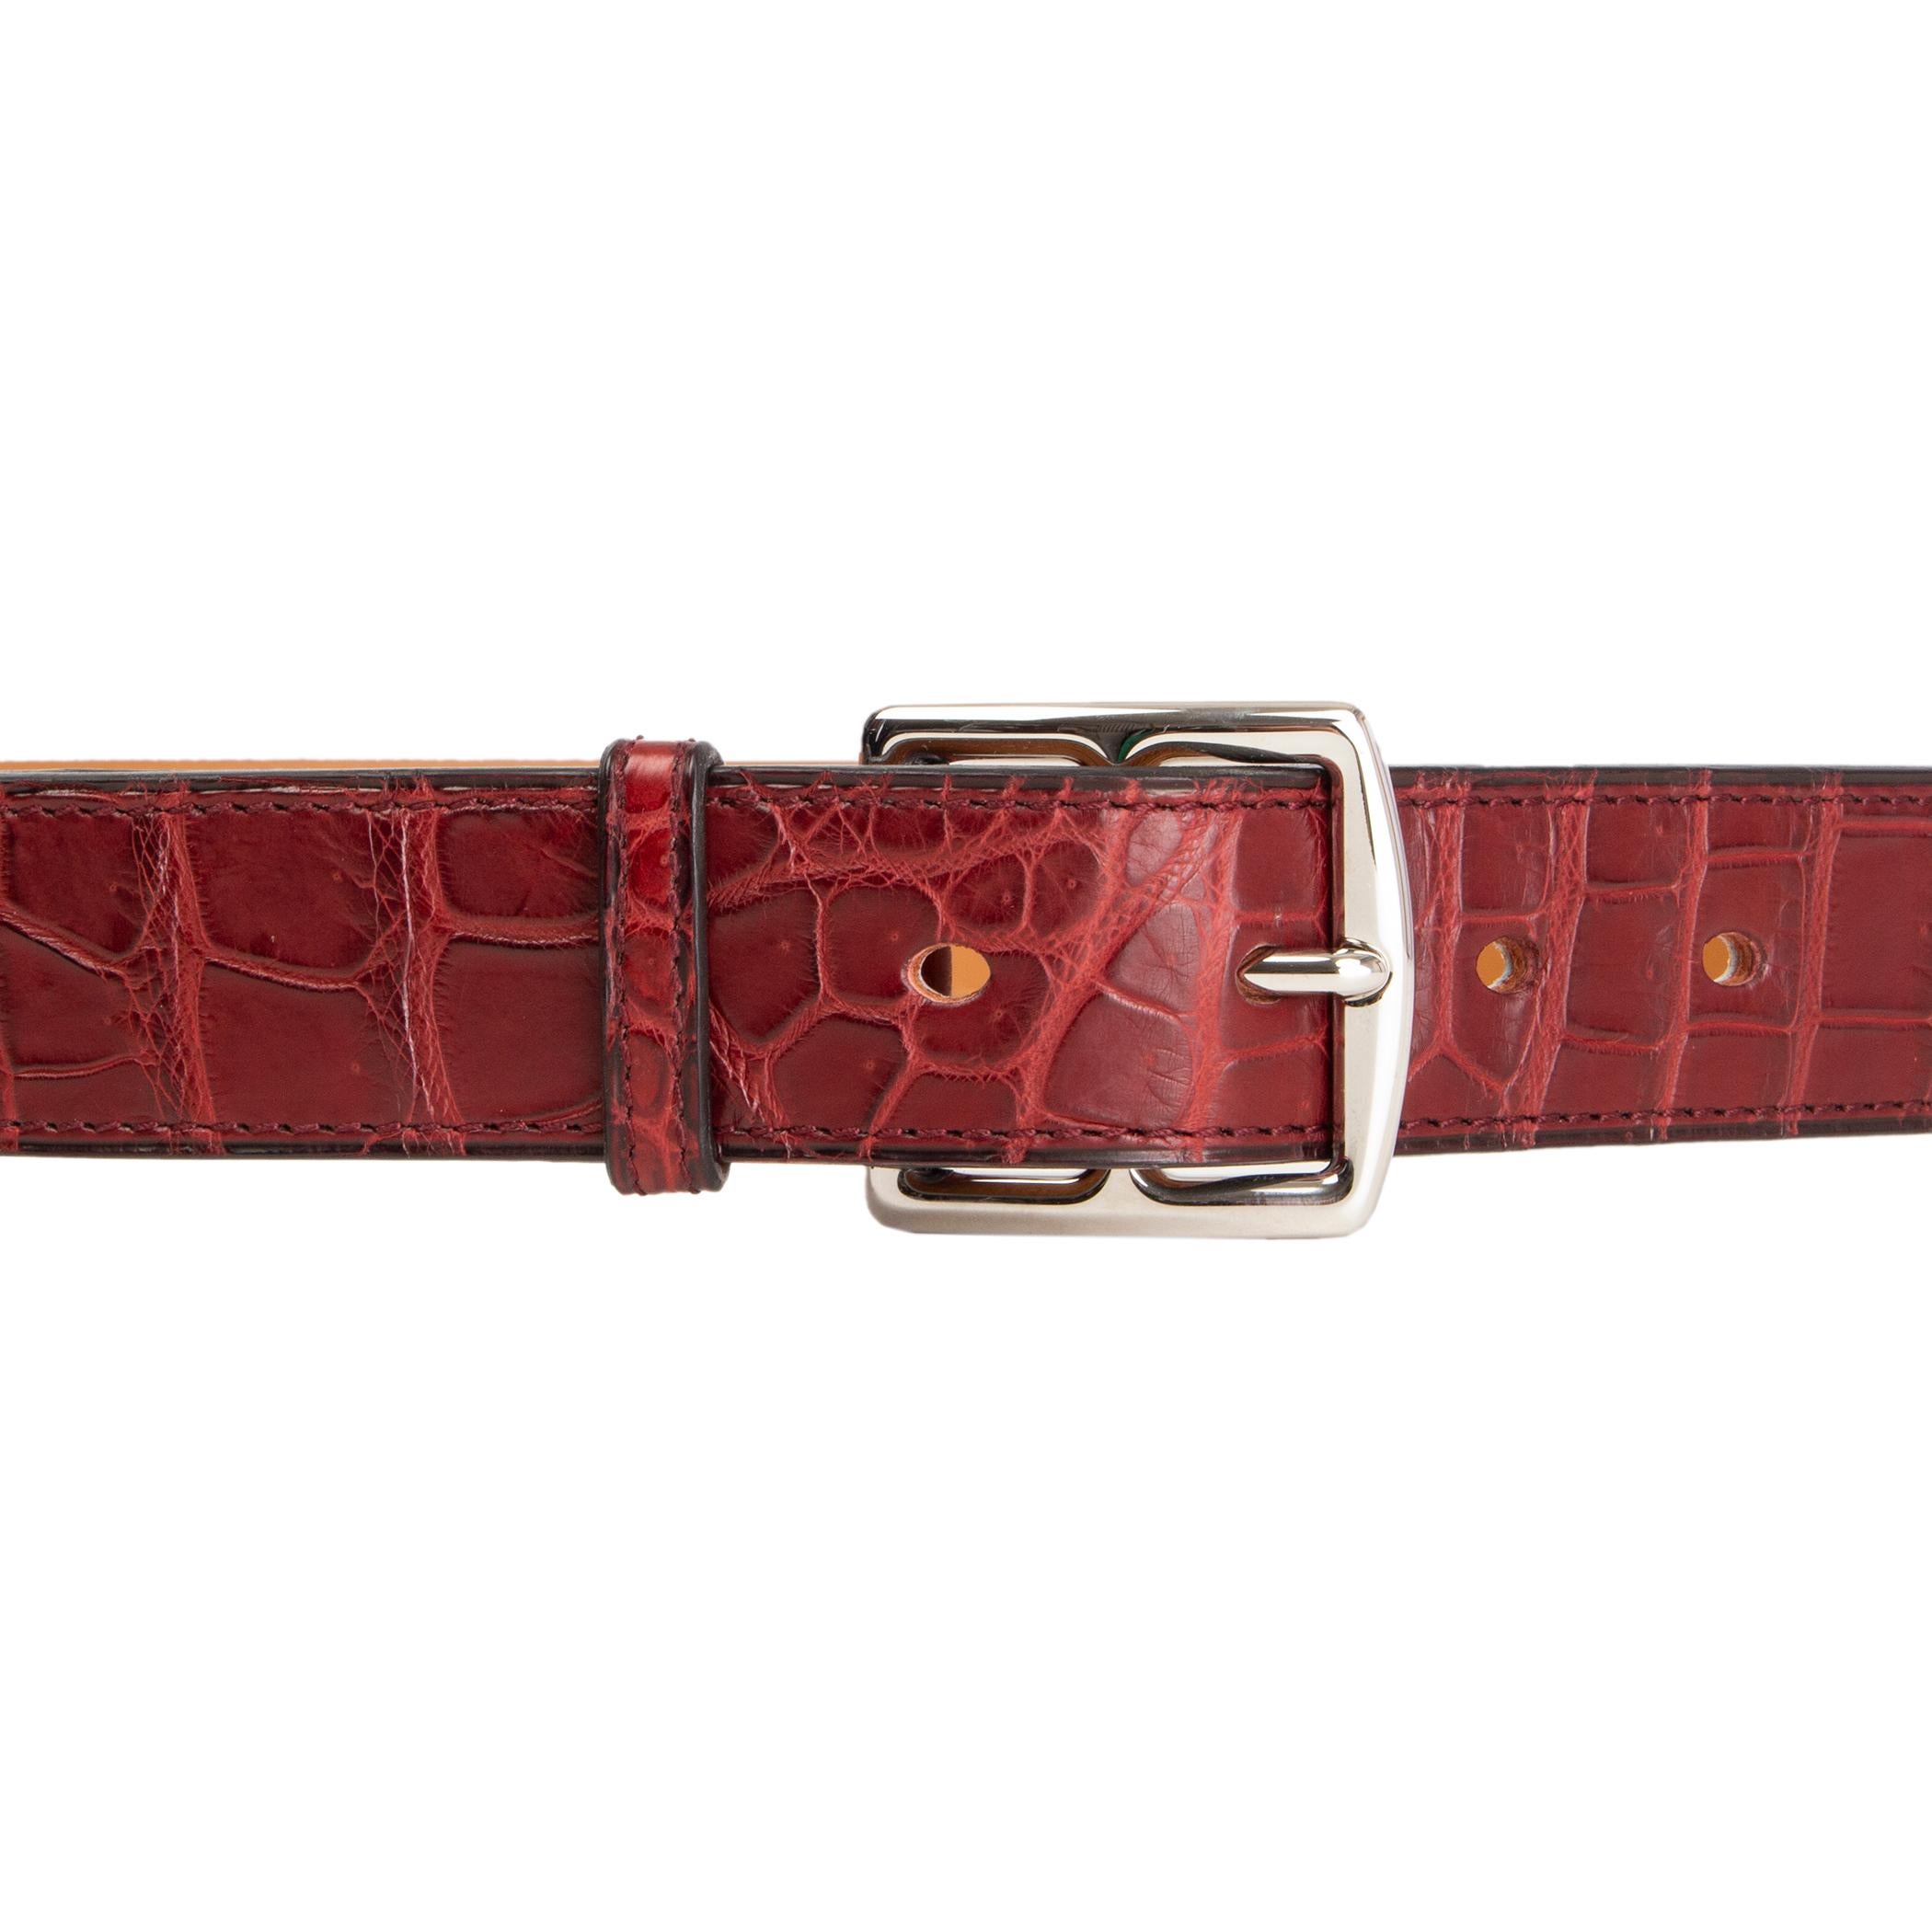 100% auth Hermes '32mm Etrivier' belt in Rouge H (burgundy) matte porosus crocodile with palladium buckle. Brand new. Comes with box.

Tag Size	90
Width	3.2cm (1.2in)
Fits	85cm (33.2in) to 95cm (37.1in)
Buckle Size Height	4.5cm (1.8in)
Buckle Size